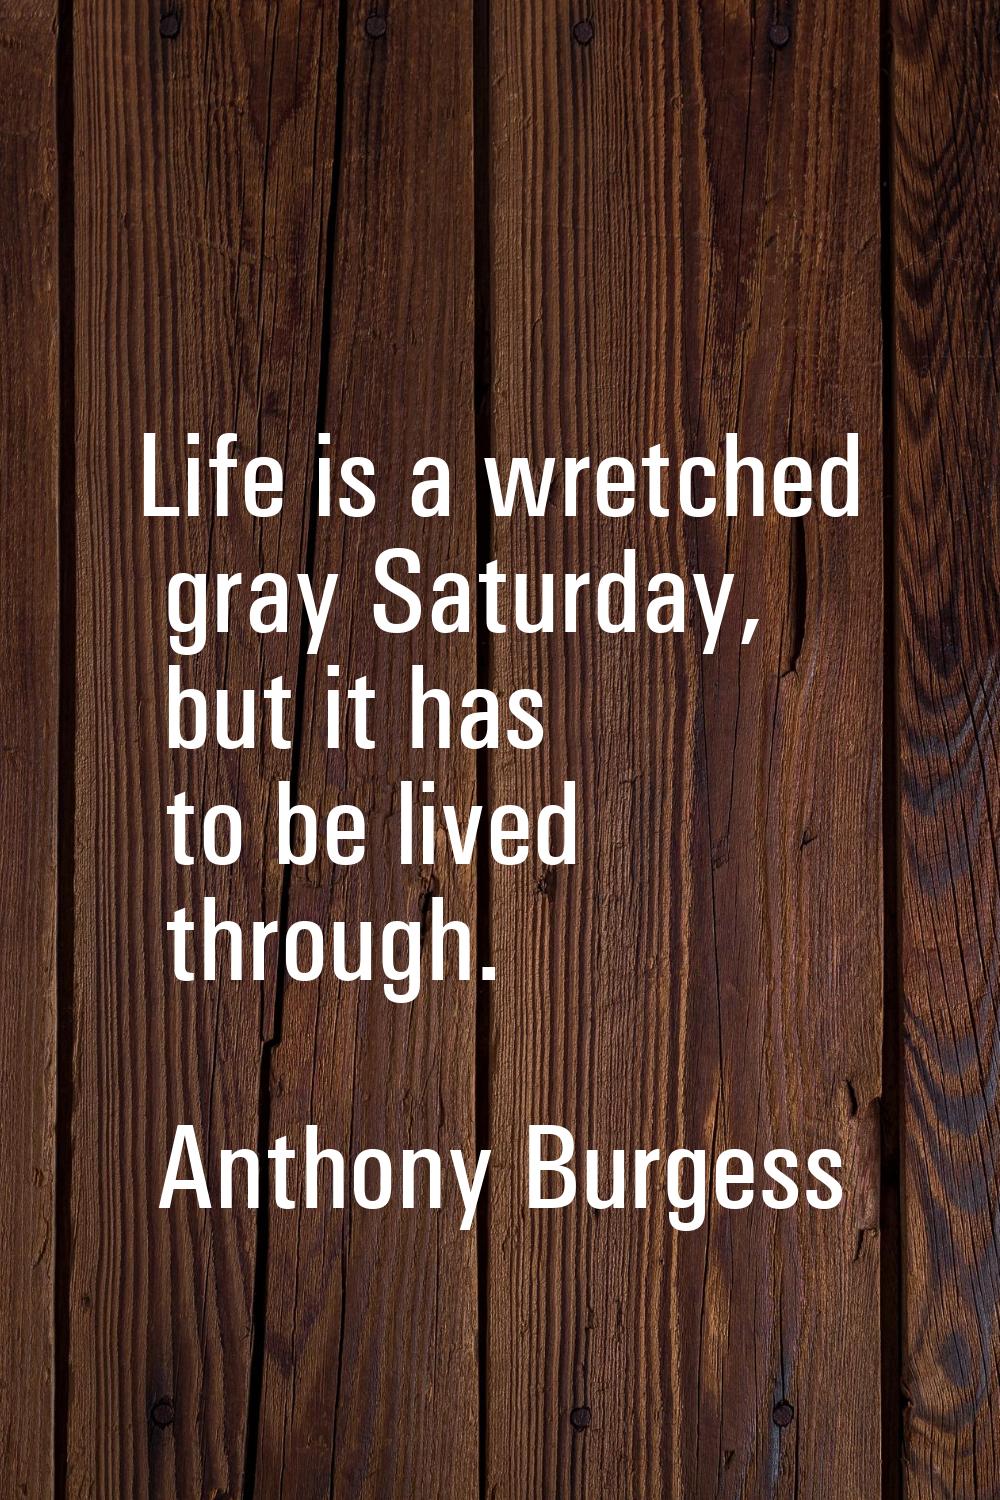 Life is a wretched gray Saturday, but it has to be lived through.